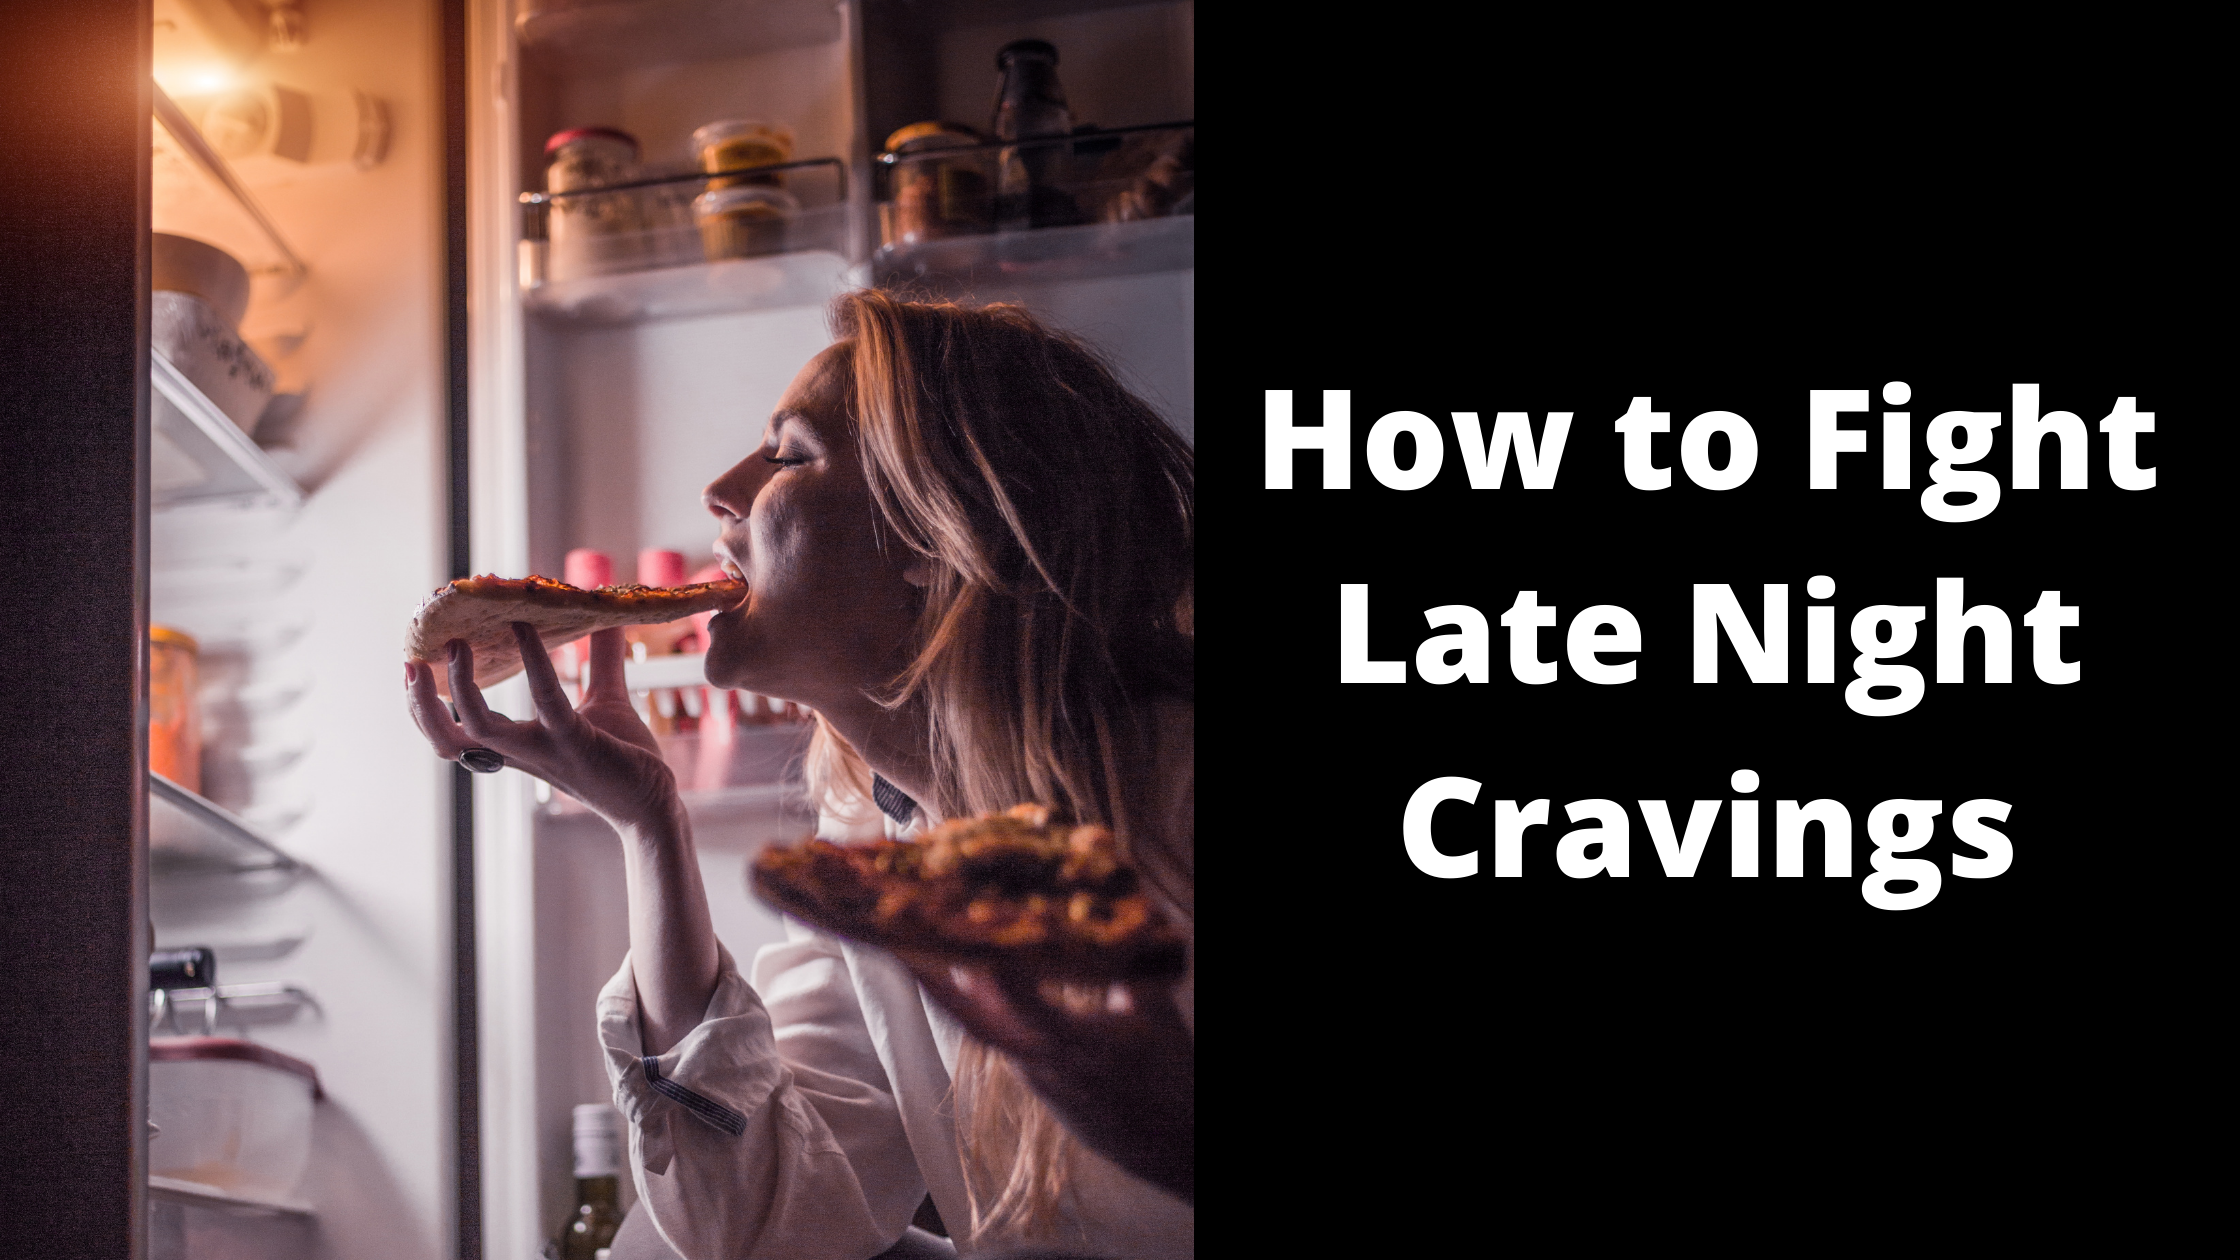 How to Fight Late Night Cravings